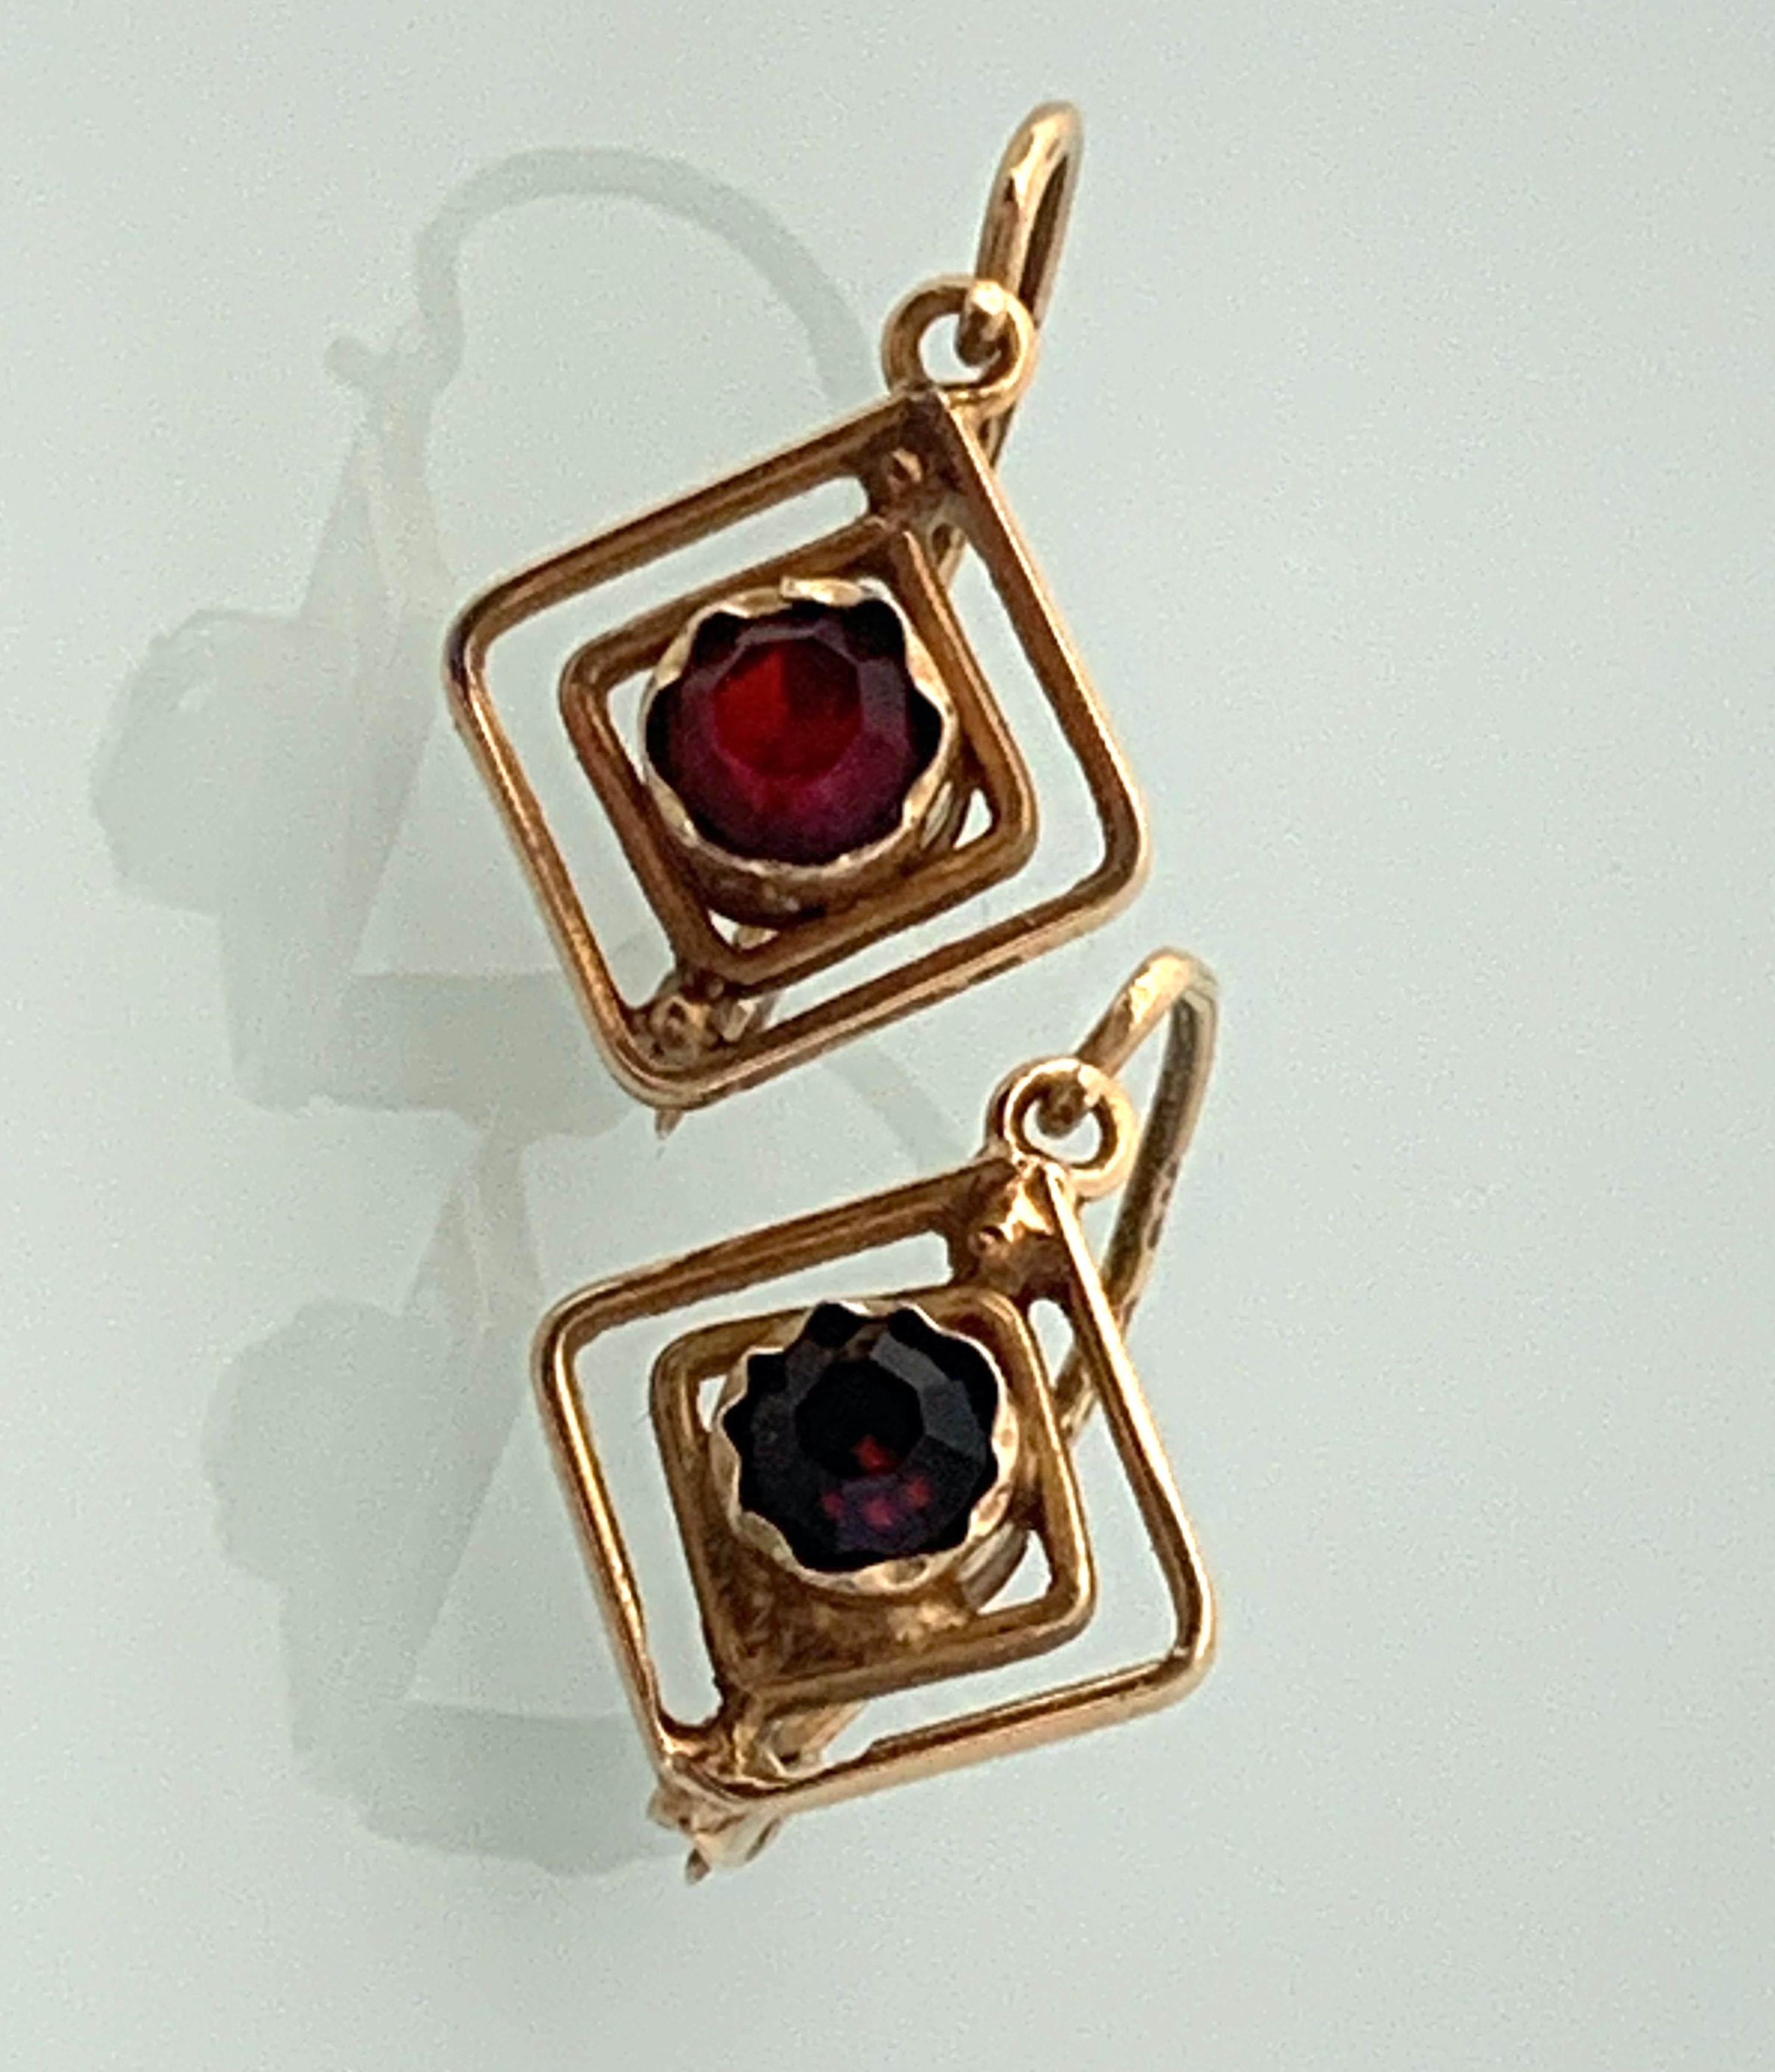 Antique 18ct Gold Gem set Earrings
Diamond Shaped in Design
unknown origin
European markings 
with central unknown stones - maroon red in colour
Forward hinge fastening.
Earrings are exquisitely hand crafted